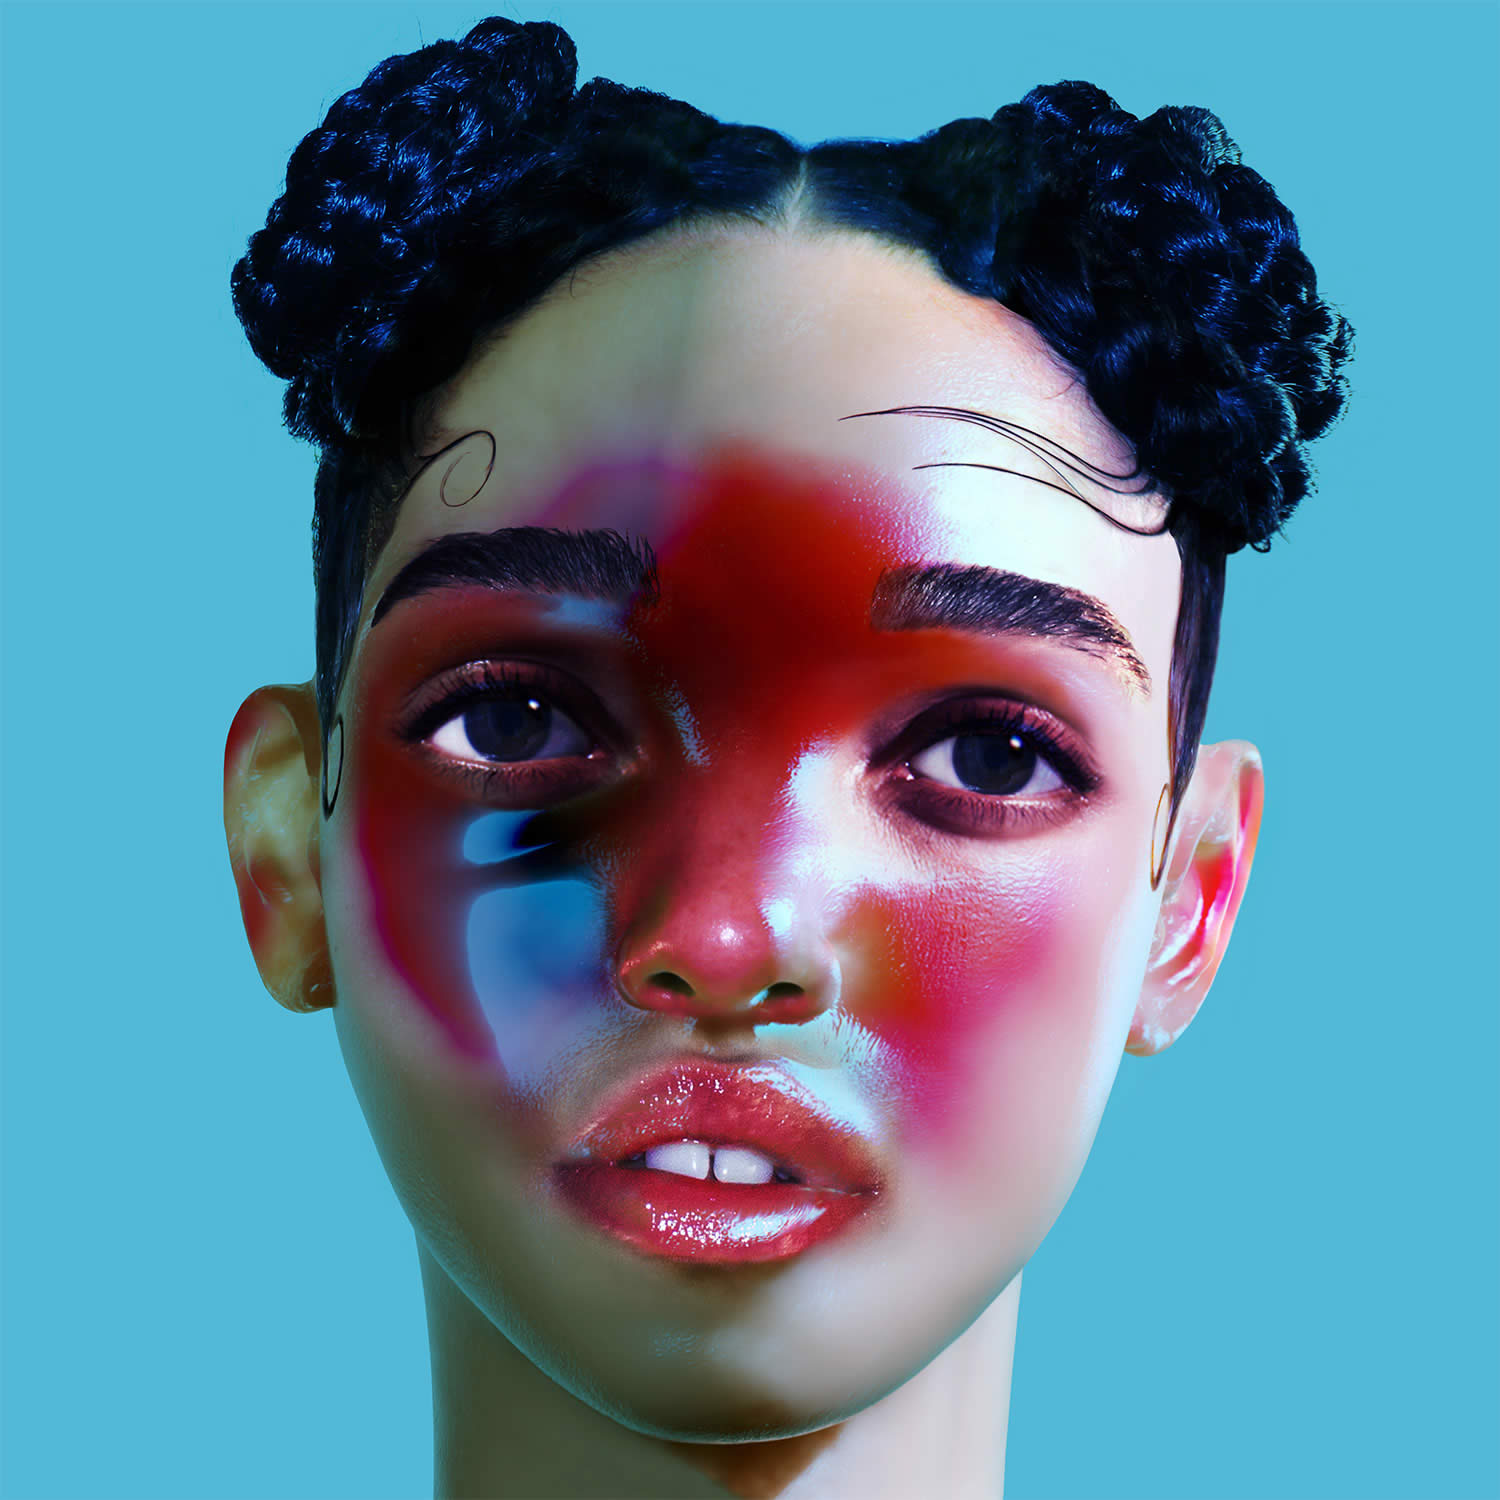 lp1 by FKA twigs, blue background and girl with red spots on face